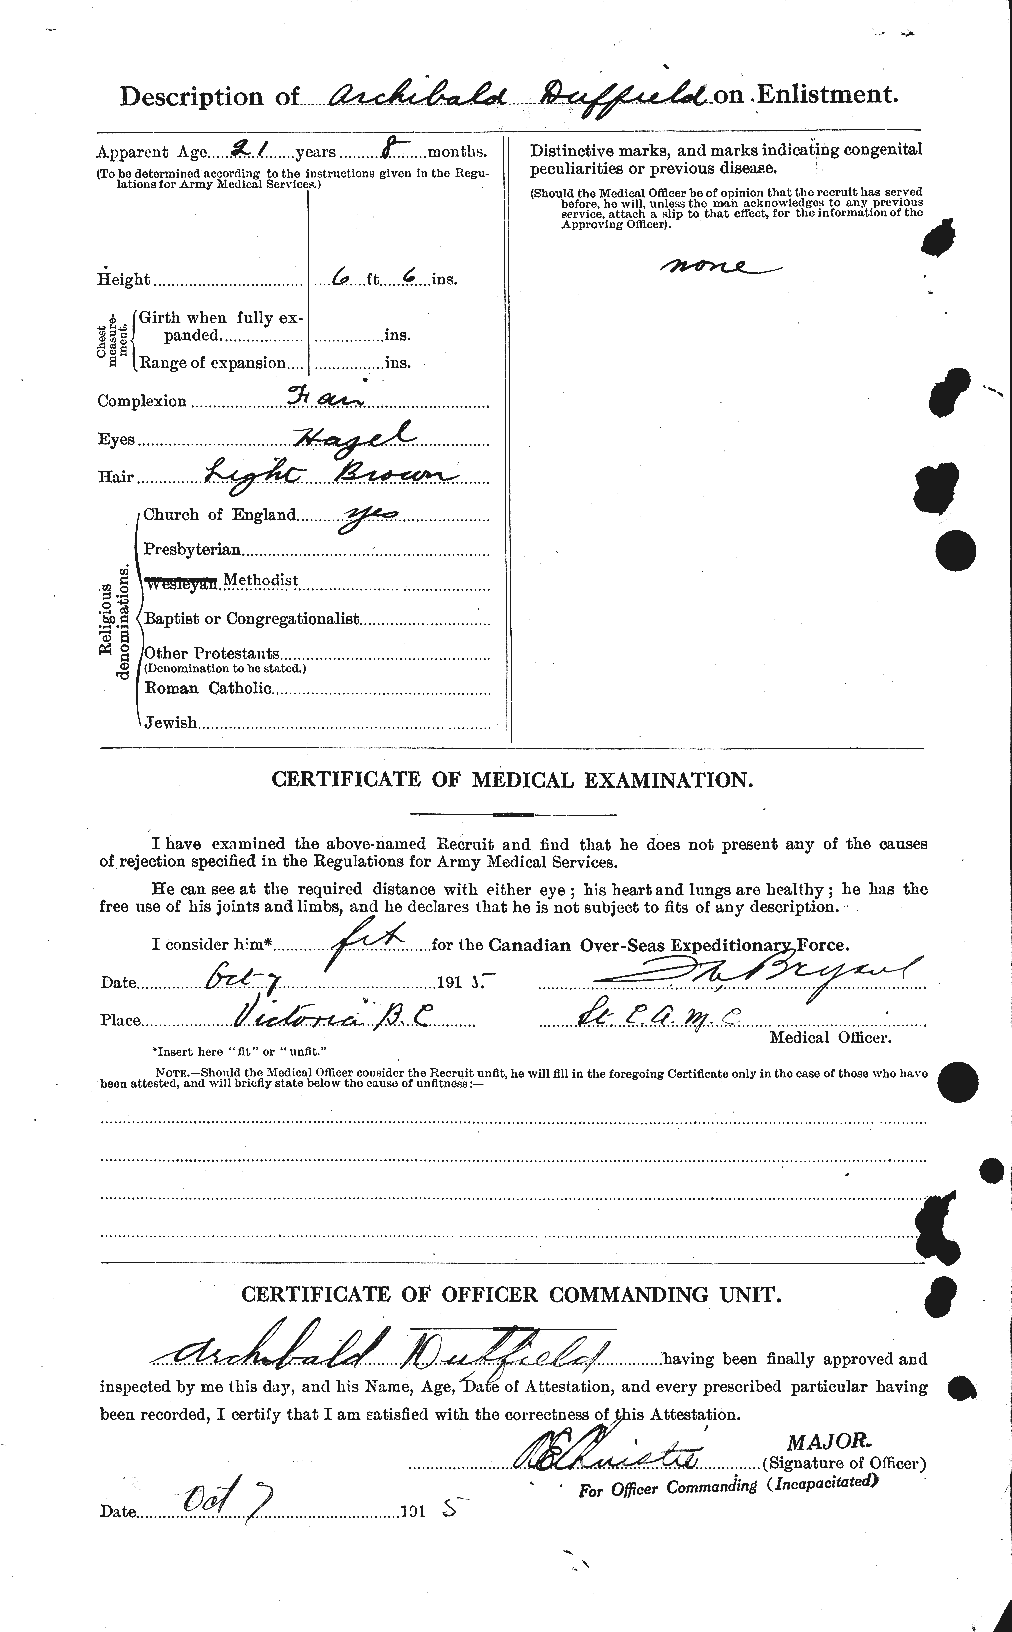 Personnel Records of the First World War - CEF 301217b